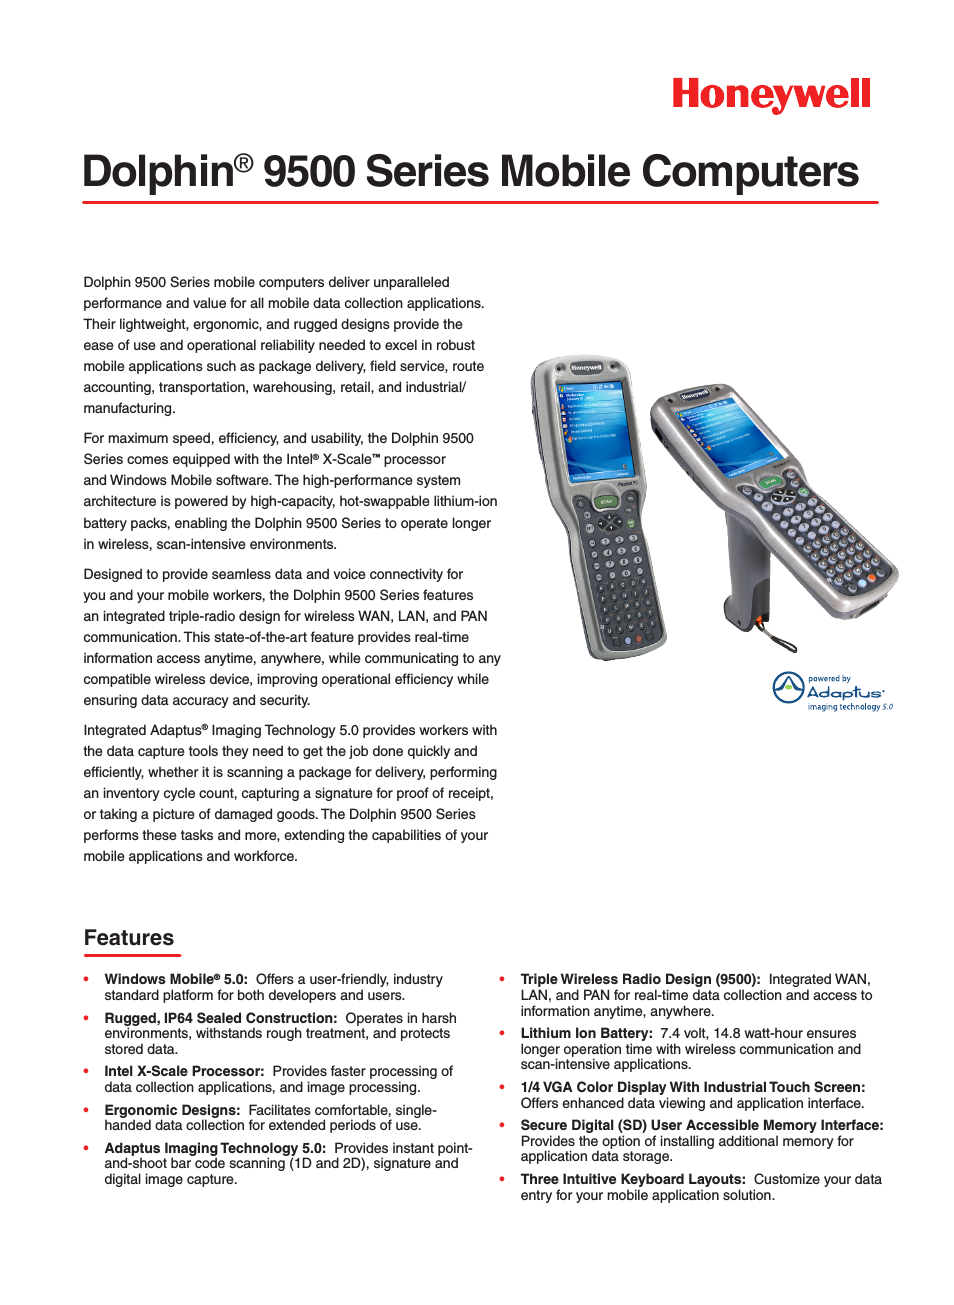 Dolphin 9500 Series